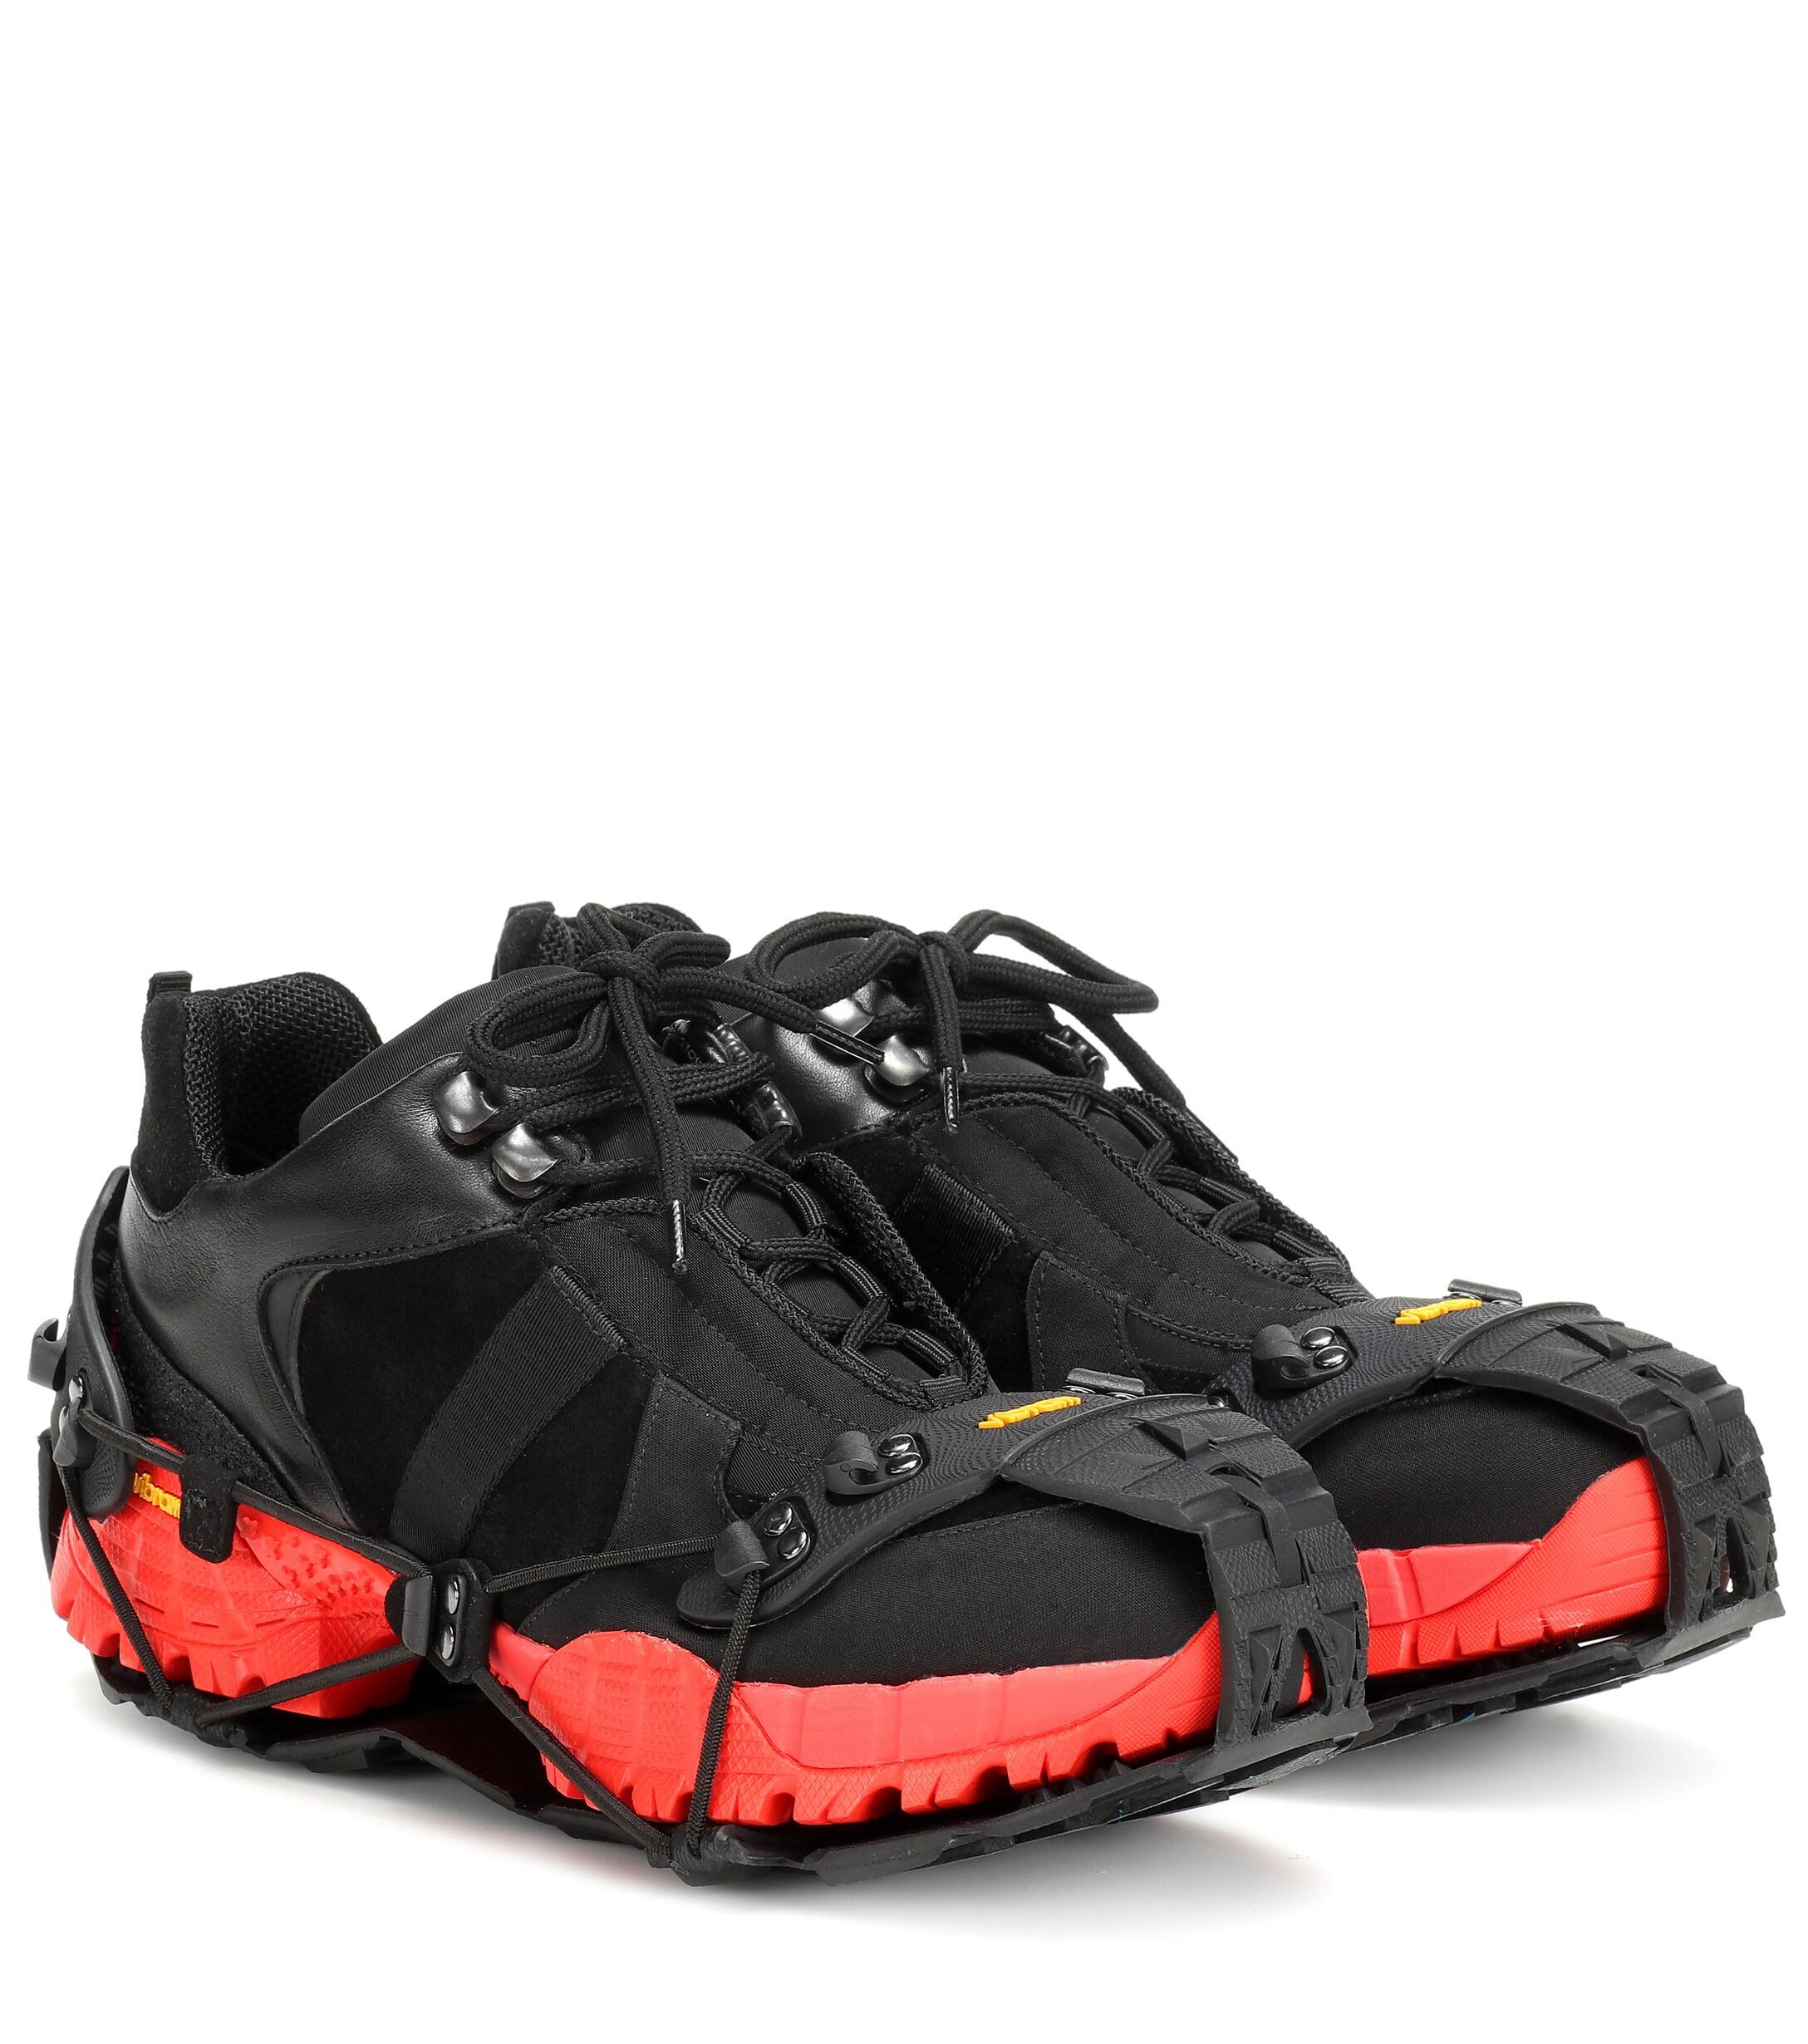 1017 ALYX 9SM Low Hiking Boot Suede Sneakers in Black / Red (Black) - Lyst